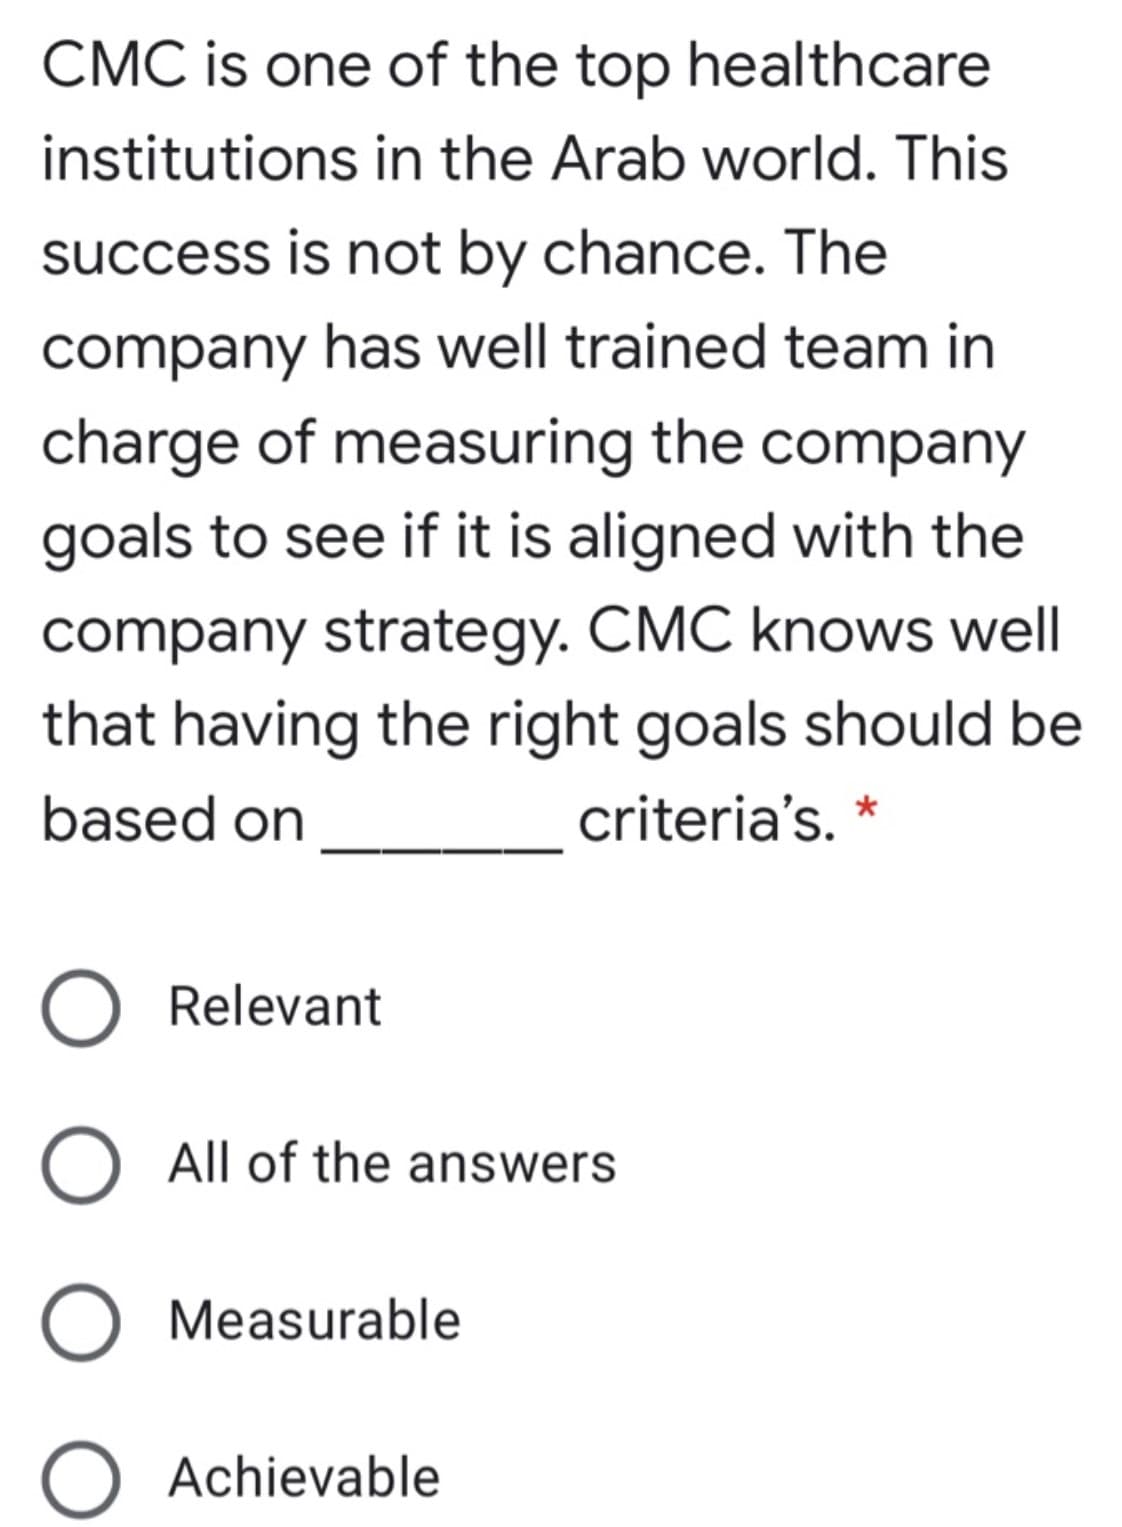 CMC is one of the top healthcare
institutions in the Arab world. This
success is not by chance. The
company has well trained team in
charge of measuring the company
goals to see if it is aligned with the
company strategy. CMC knows well
that having the right goals should be
based on
criteria's. *
O Relevant
O All of the answers
O Measurable
O Achievable
